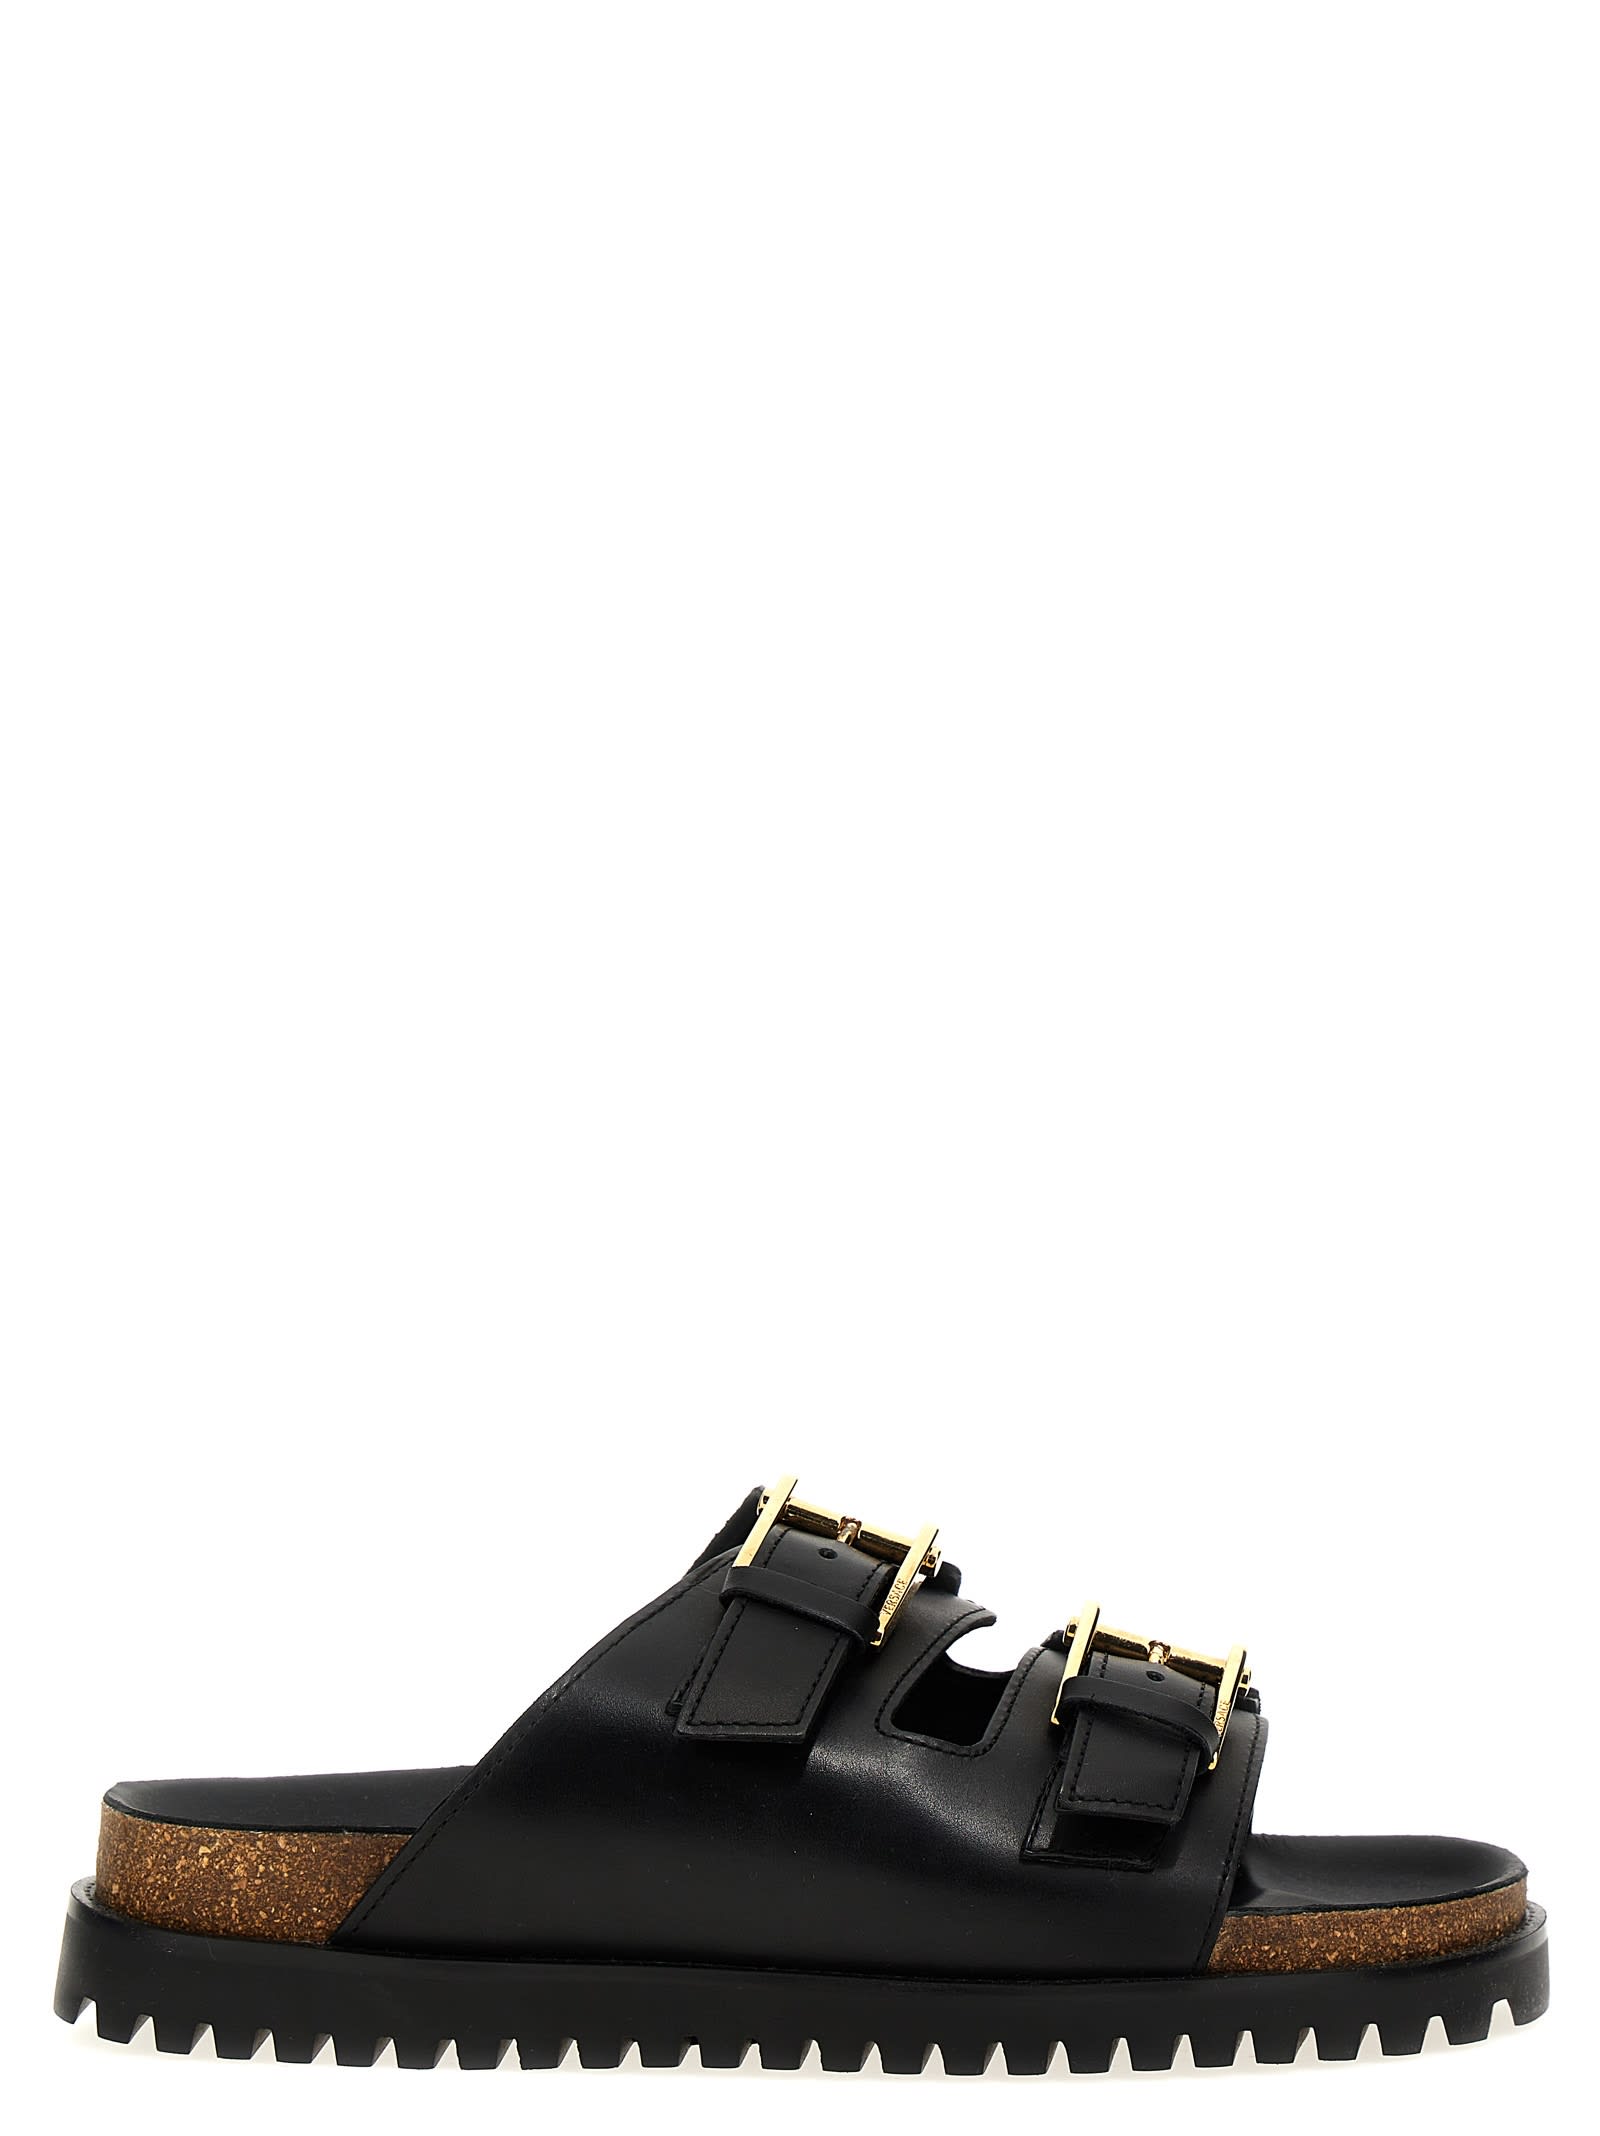 VERSACE LEATHER SANDALS